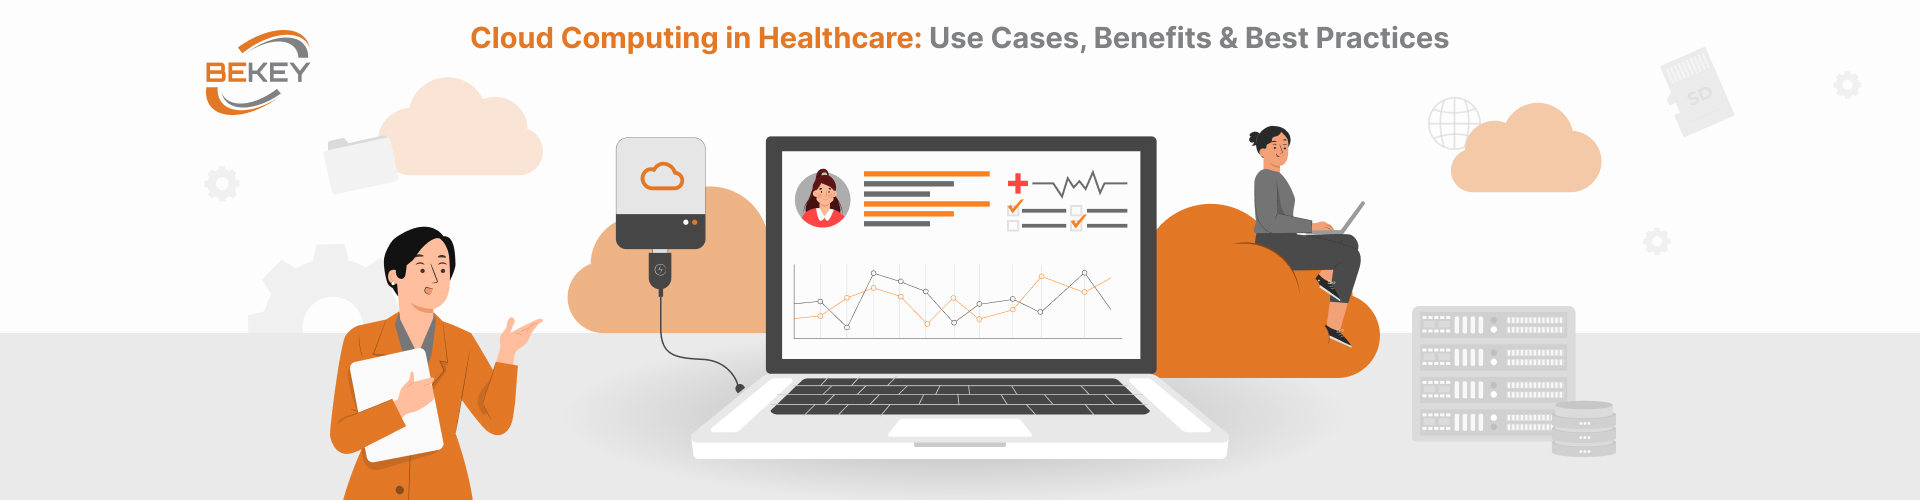 Cloud Computing in Healthcare: Use Cases, Benefits & Best Practices - image